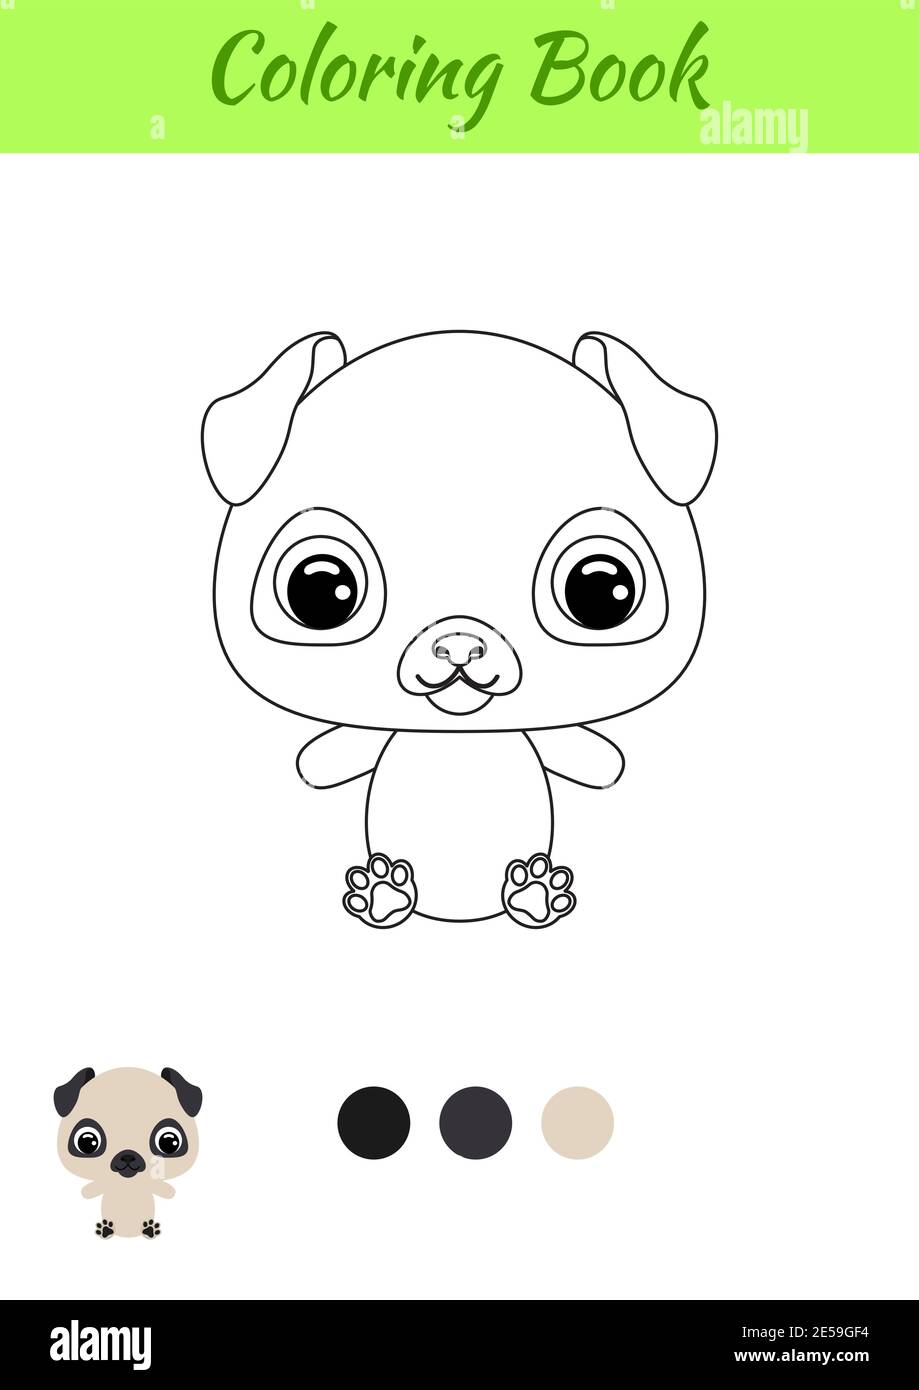 Download Coloring Book Little Baby Pug Dog Sitting Coloring Page For Kids Educational Activity For Preschool Years Kids And Toddlers With Cute Animal Stock Vector Image Art Alamy